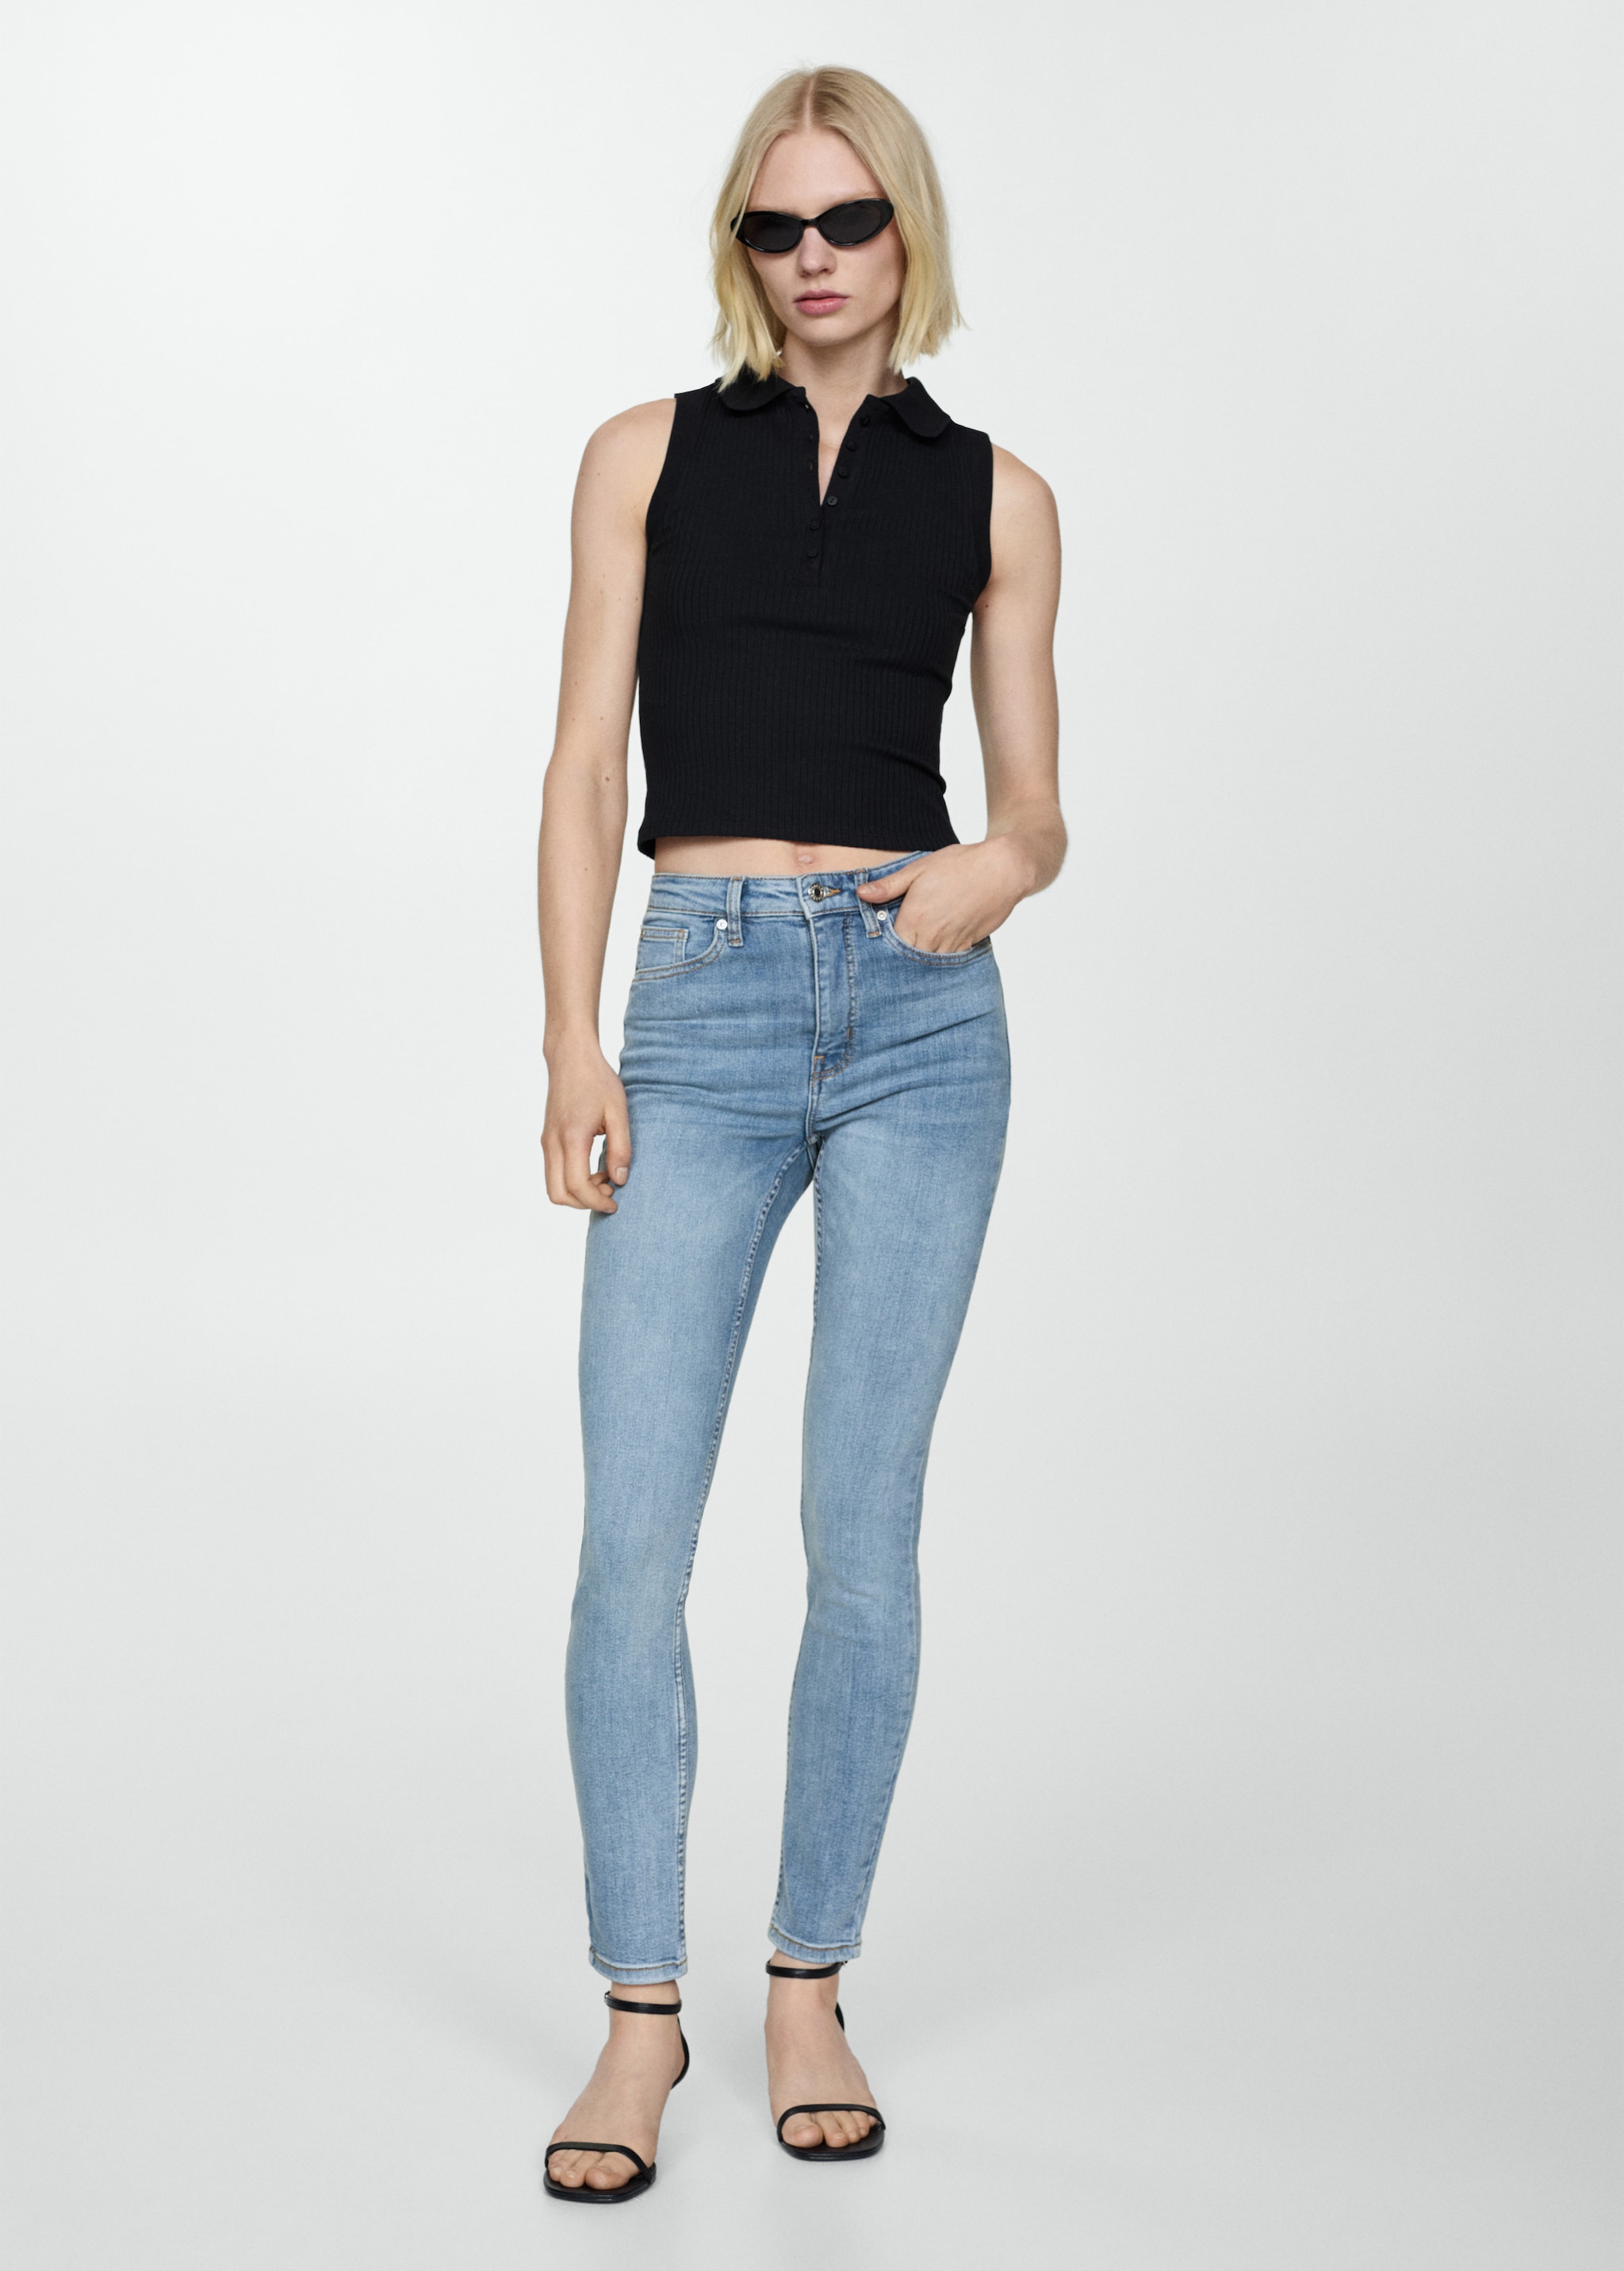 High-rise skinny jeans - General plane